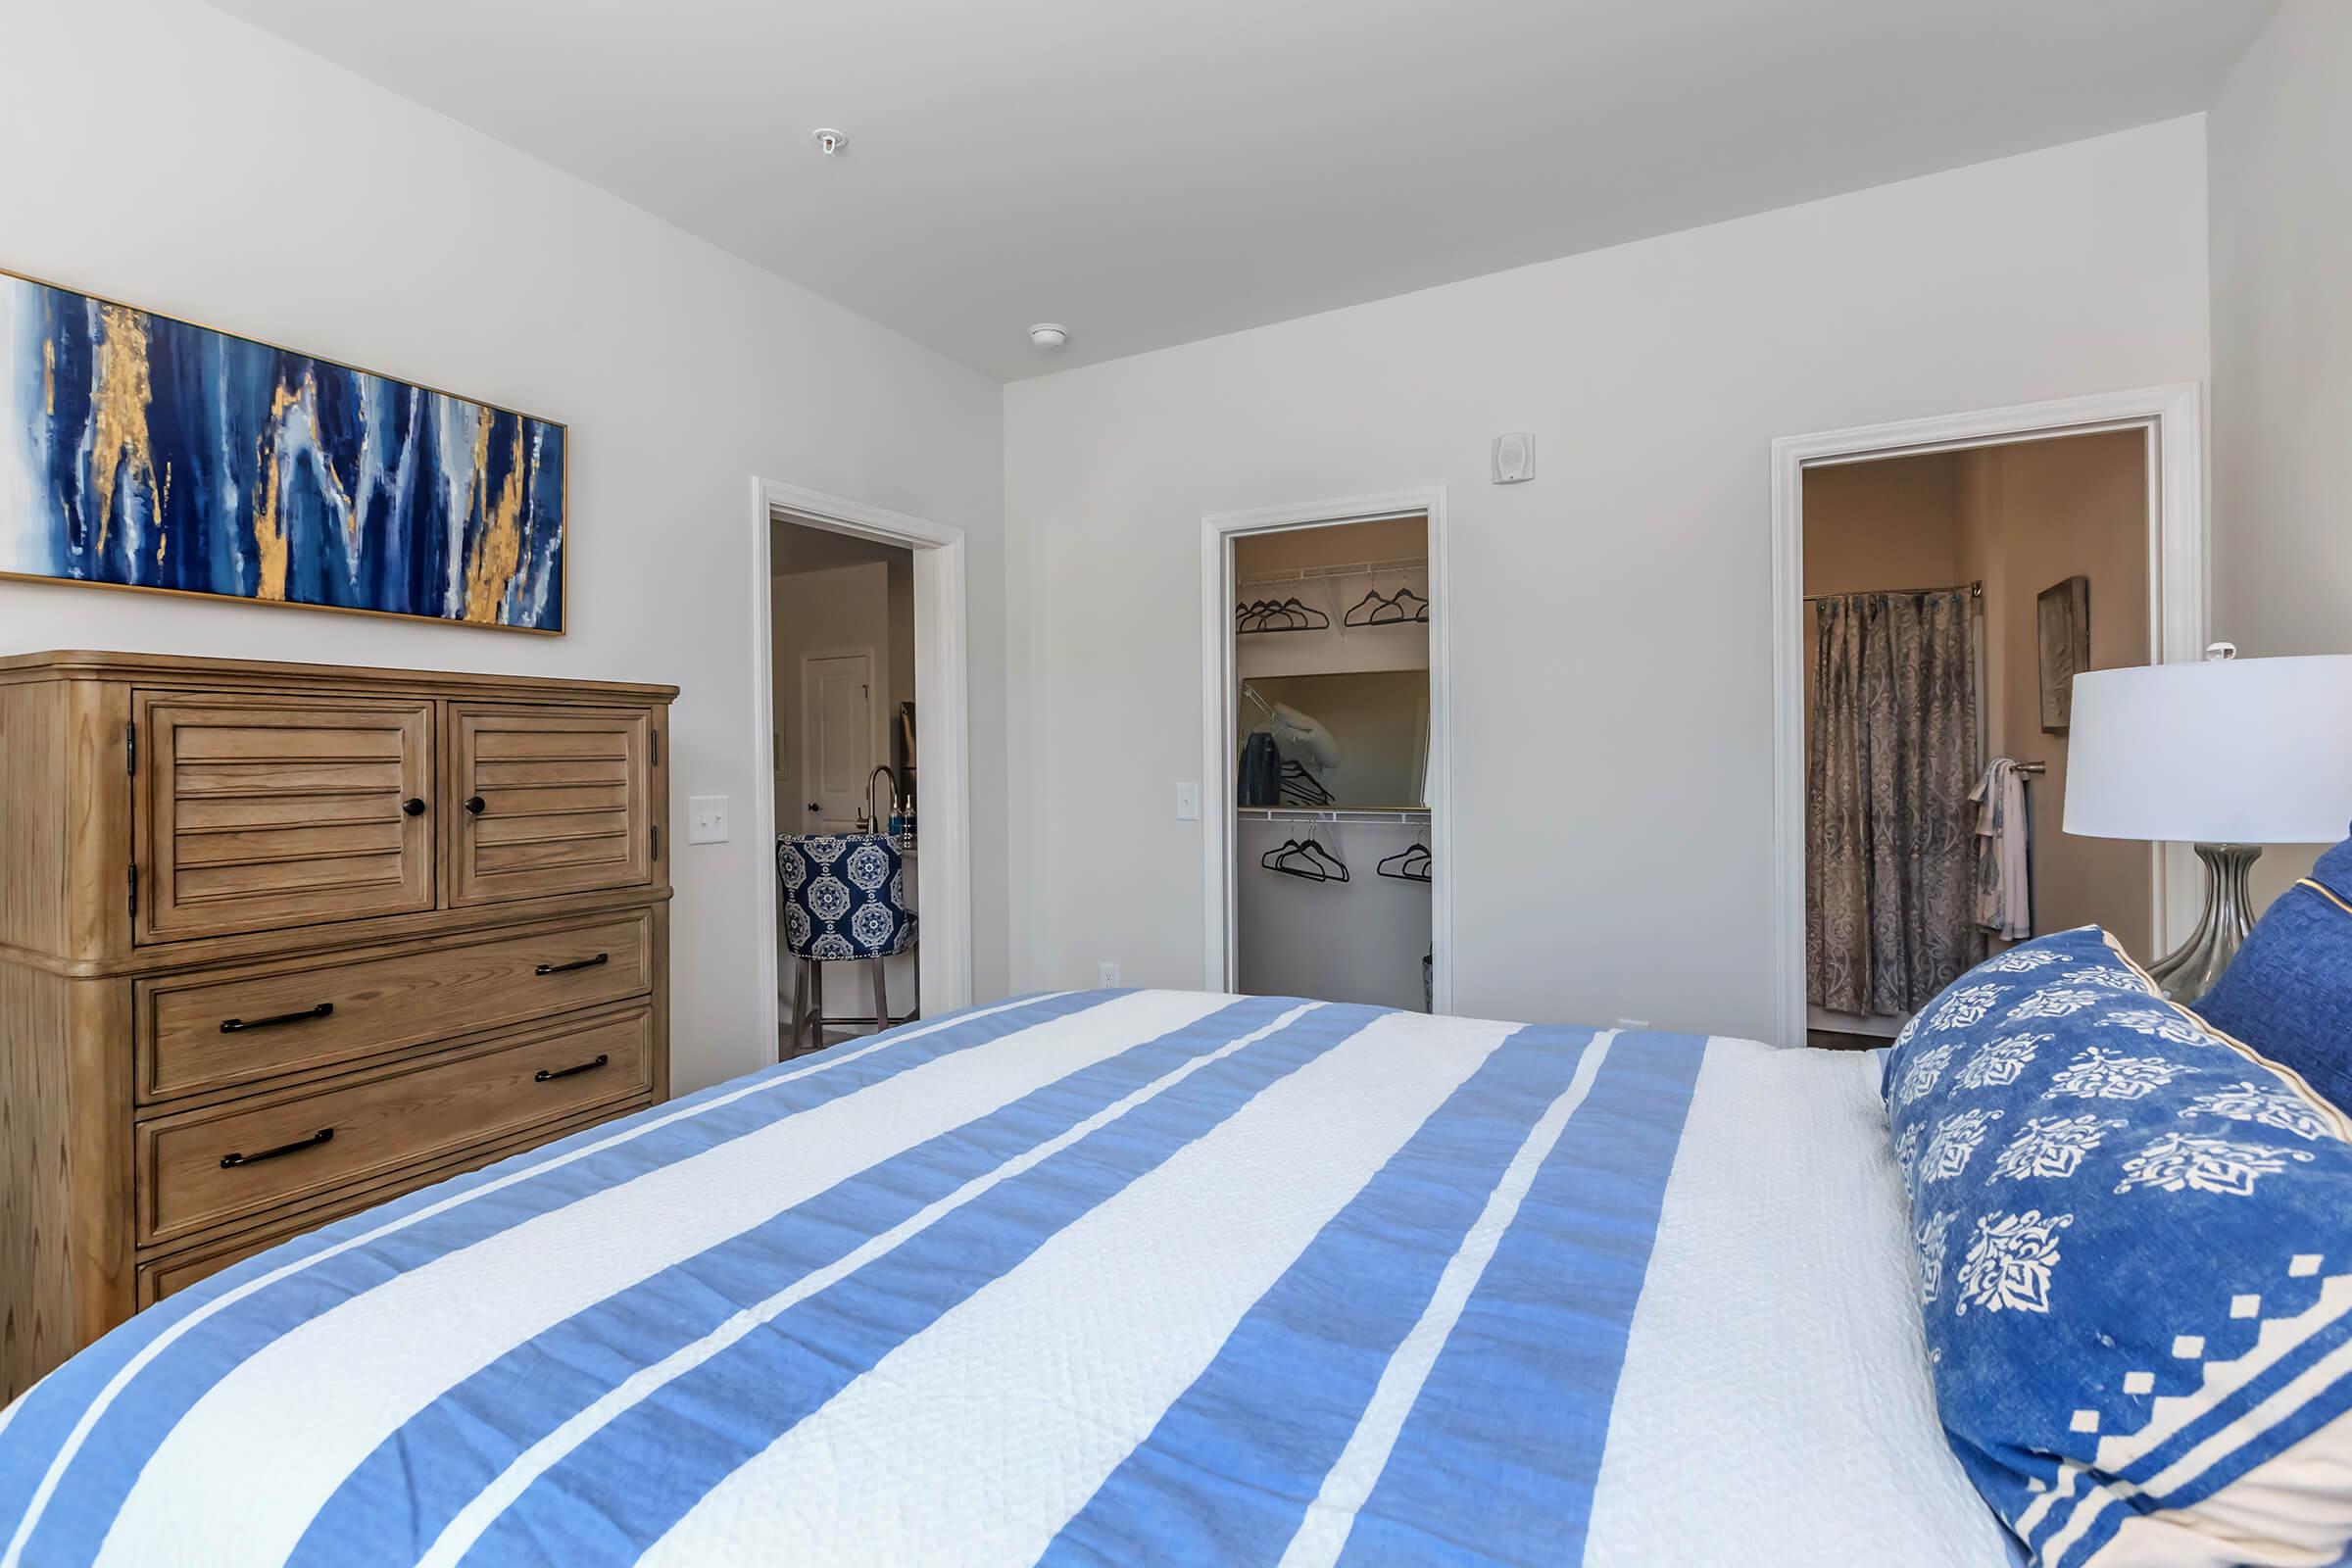 Cozy Bedroom In Riverstone Apartments At Long Shoals In Arden, NC